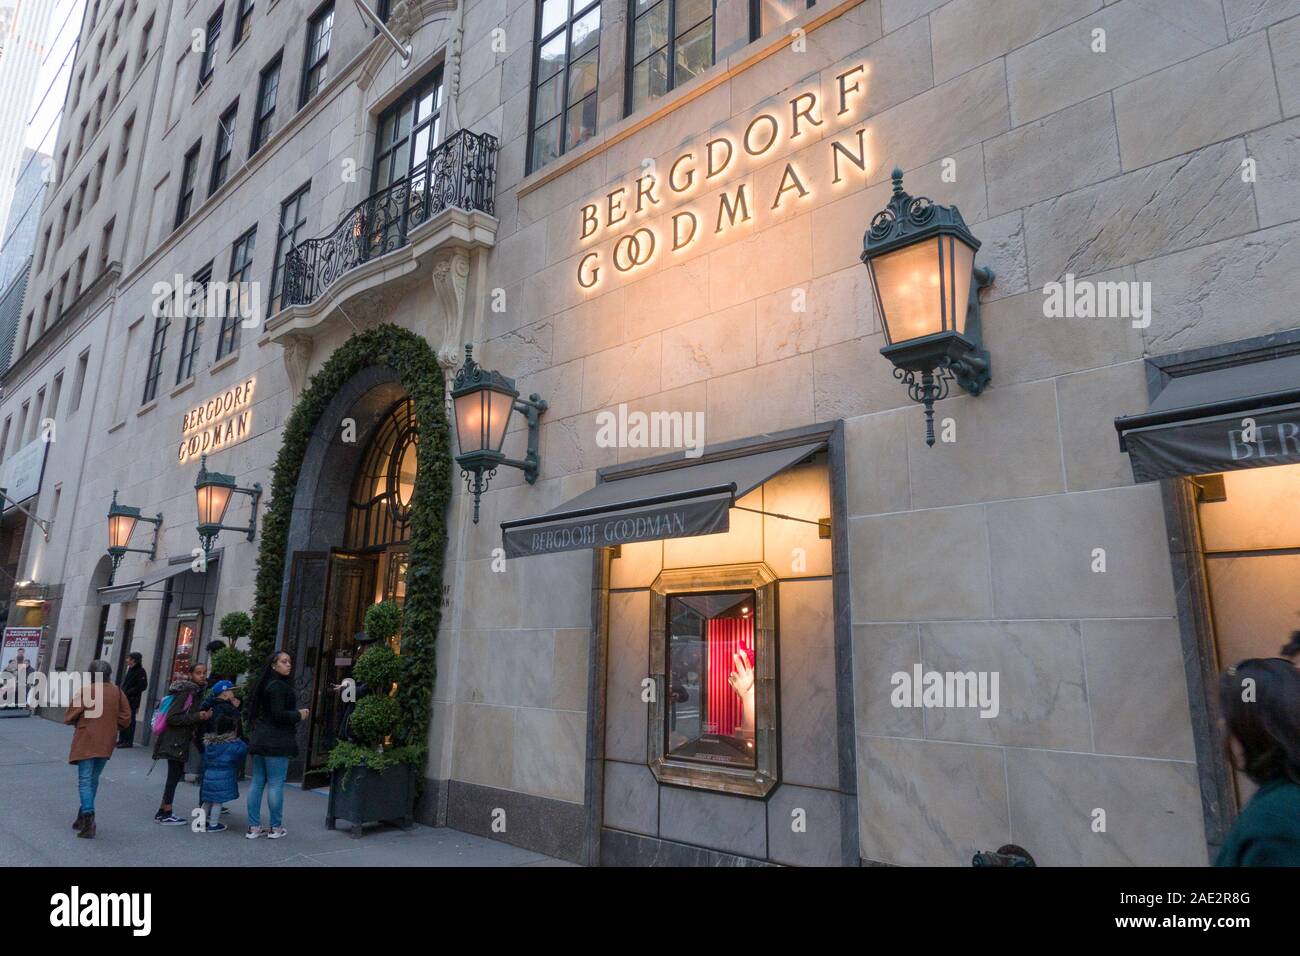 Holiday Window Display at Bergdorf Goodman, NYC. Editorial Photo - Image of  background, pedestrians: 132019021